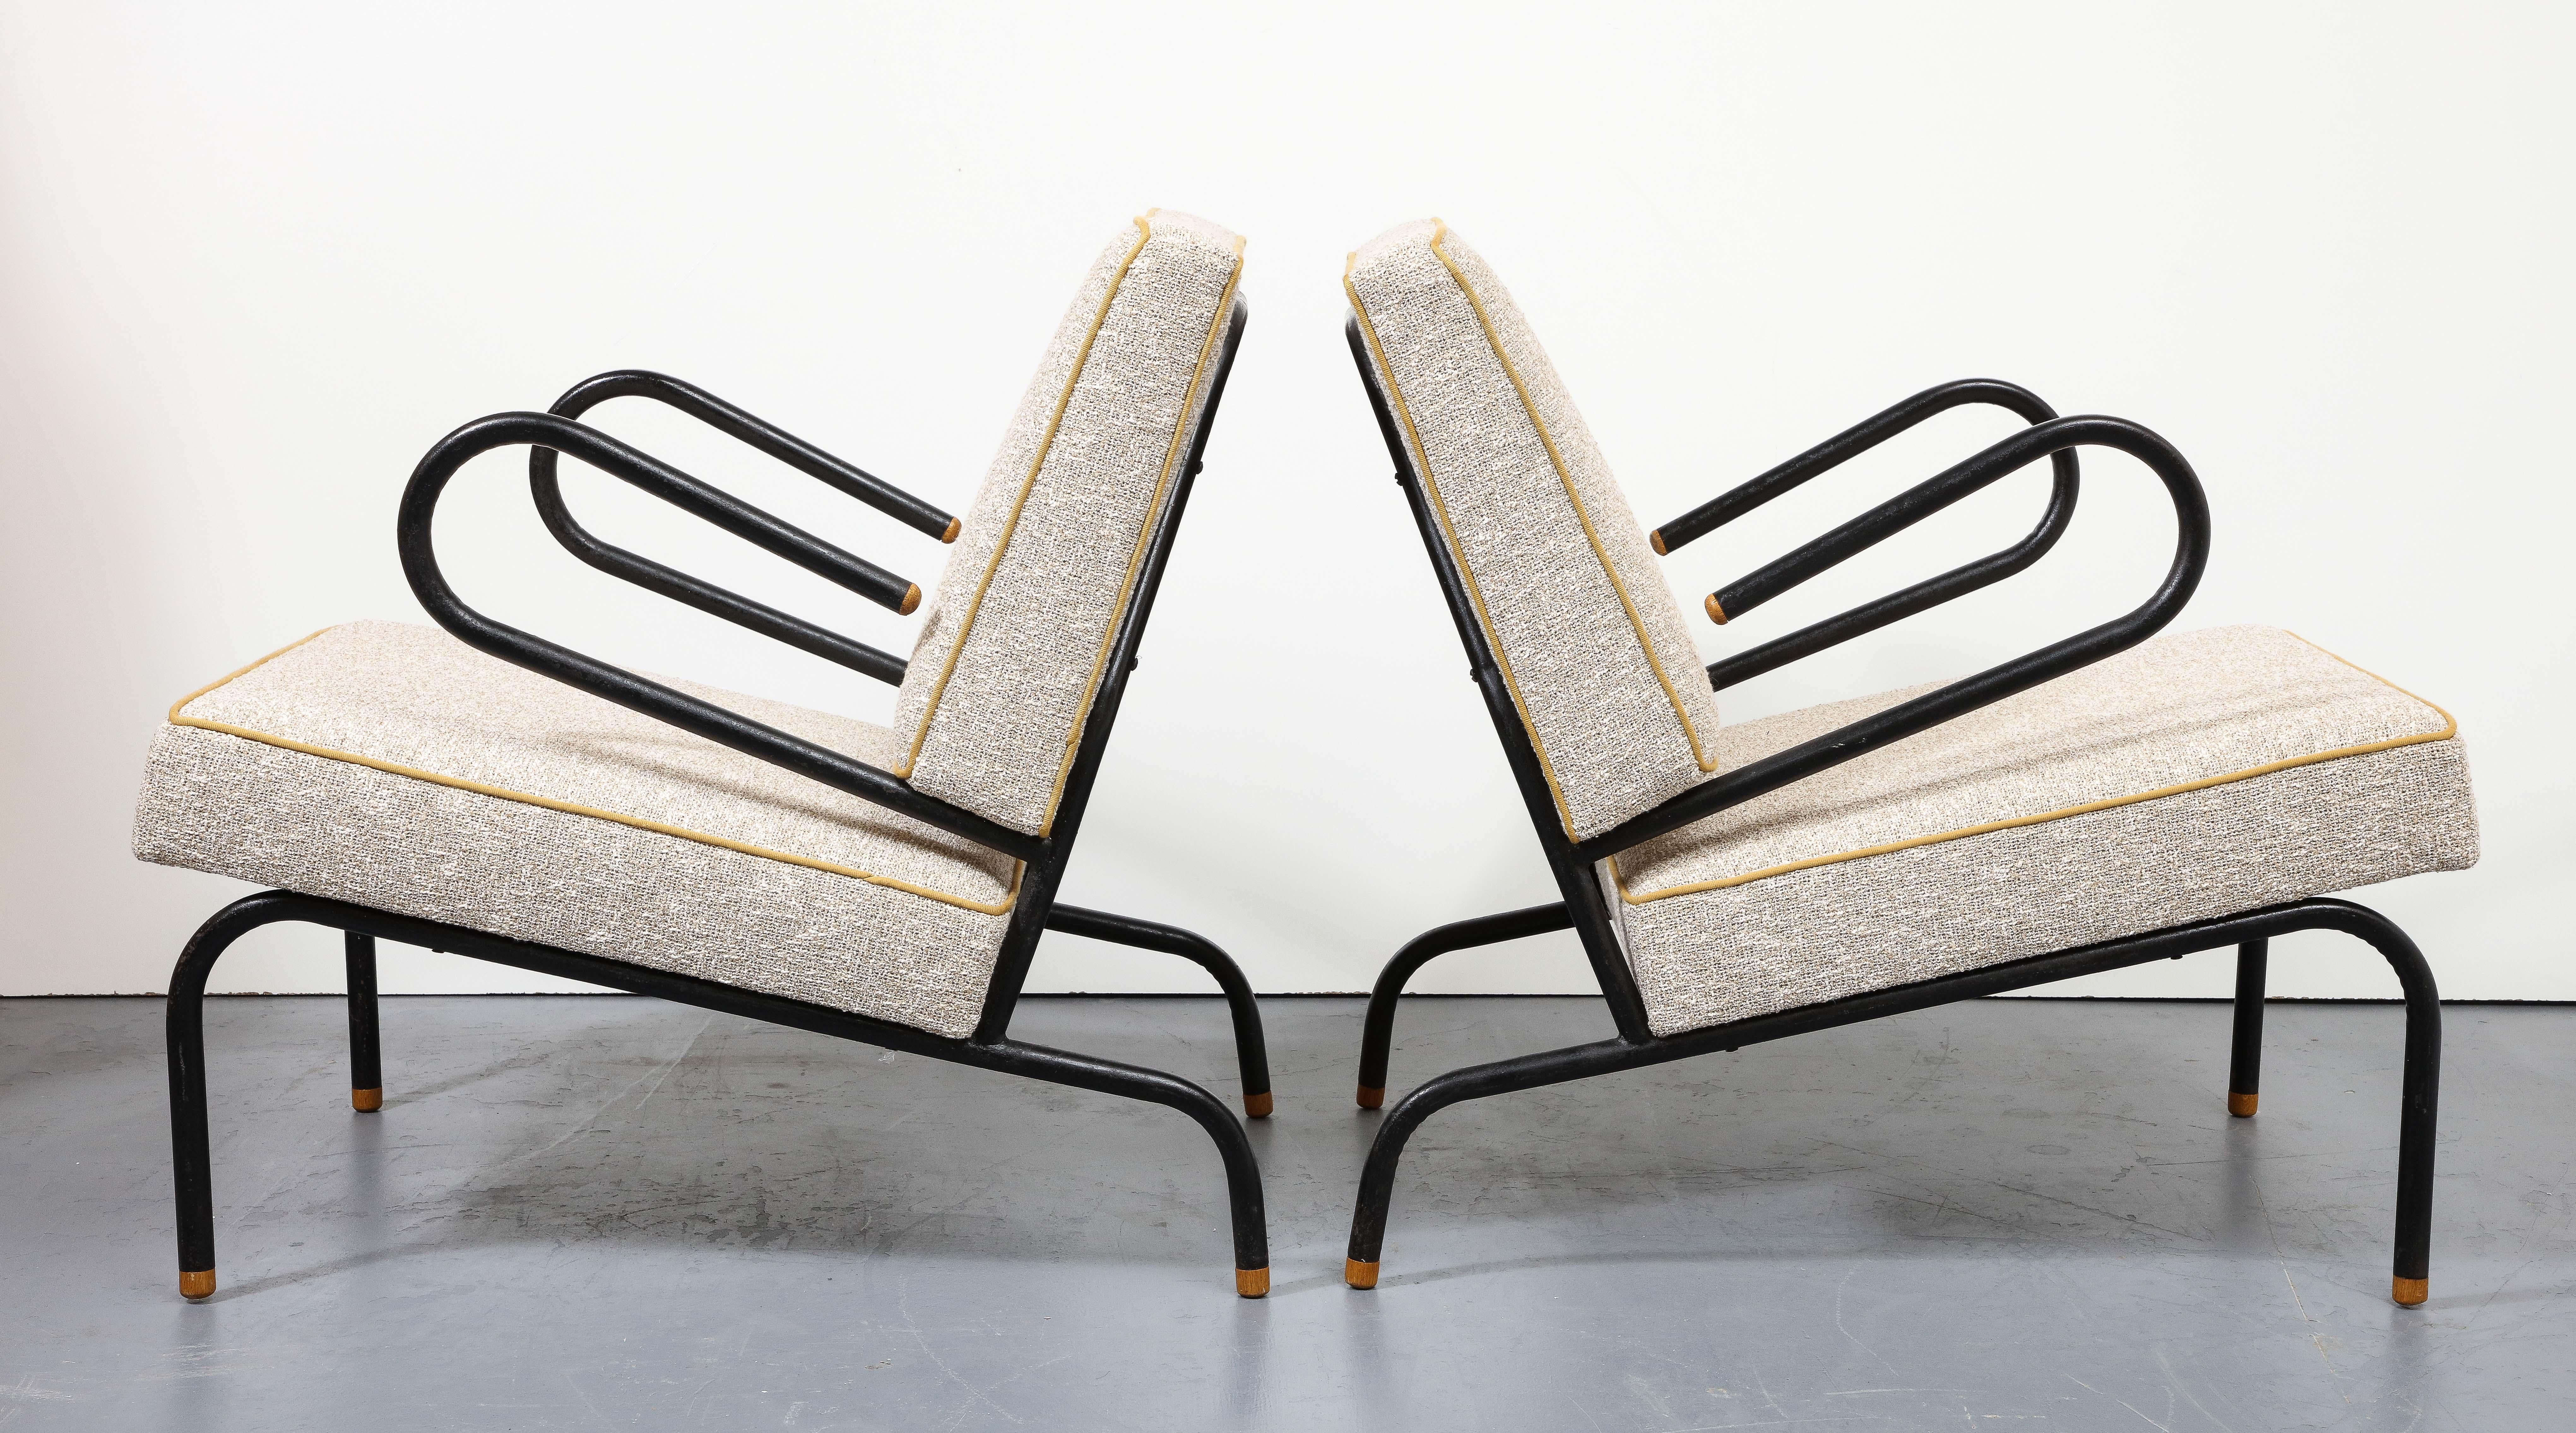 Modern Bent Steel Lounge Chair by Jacques Hitier for Tubauto, France, c. 1955 For Sale